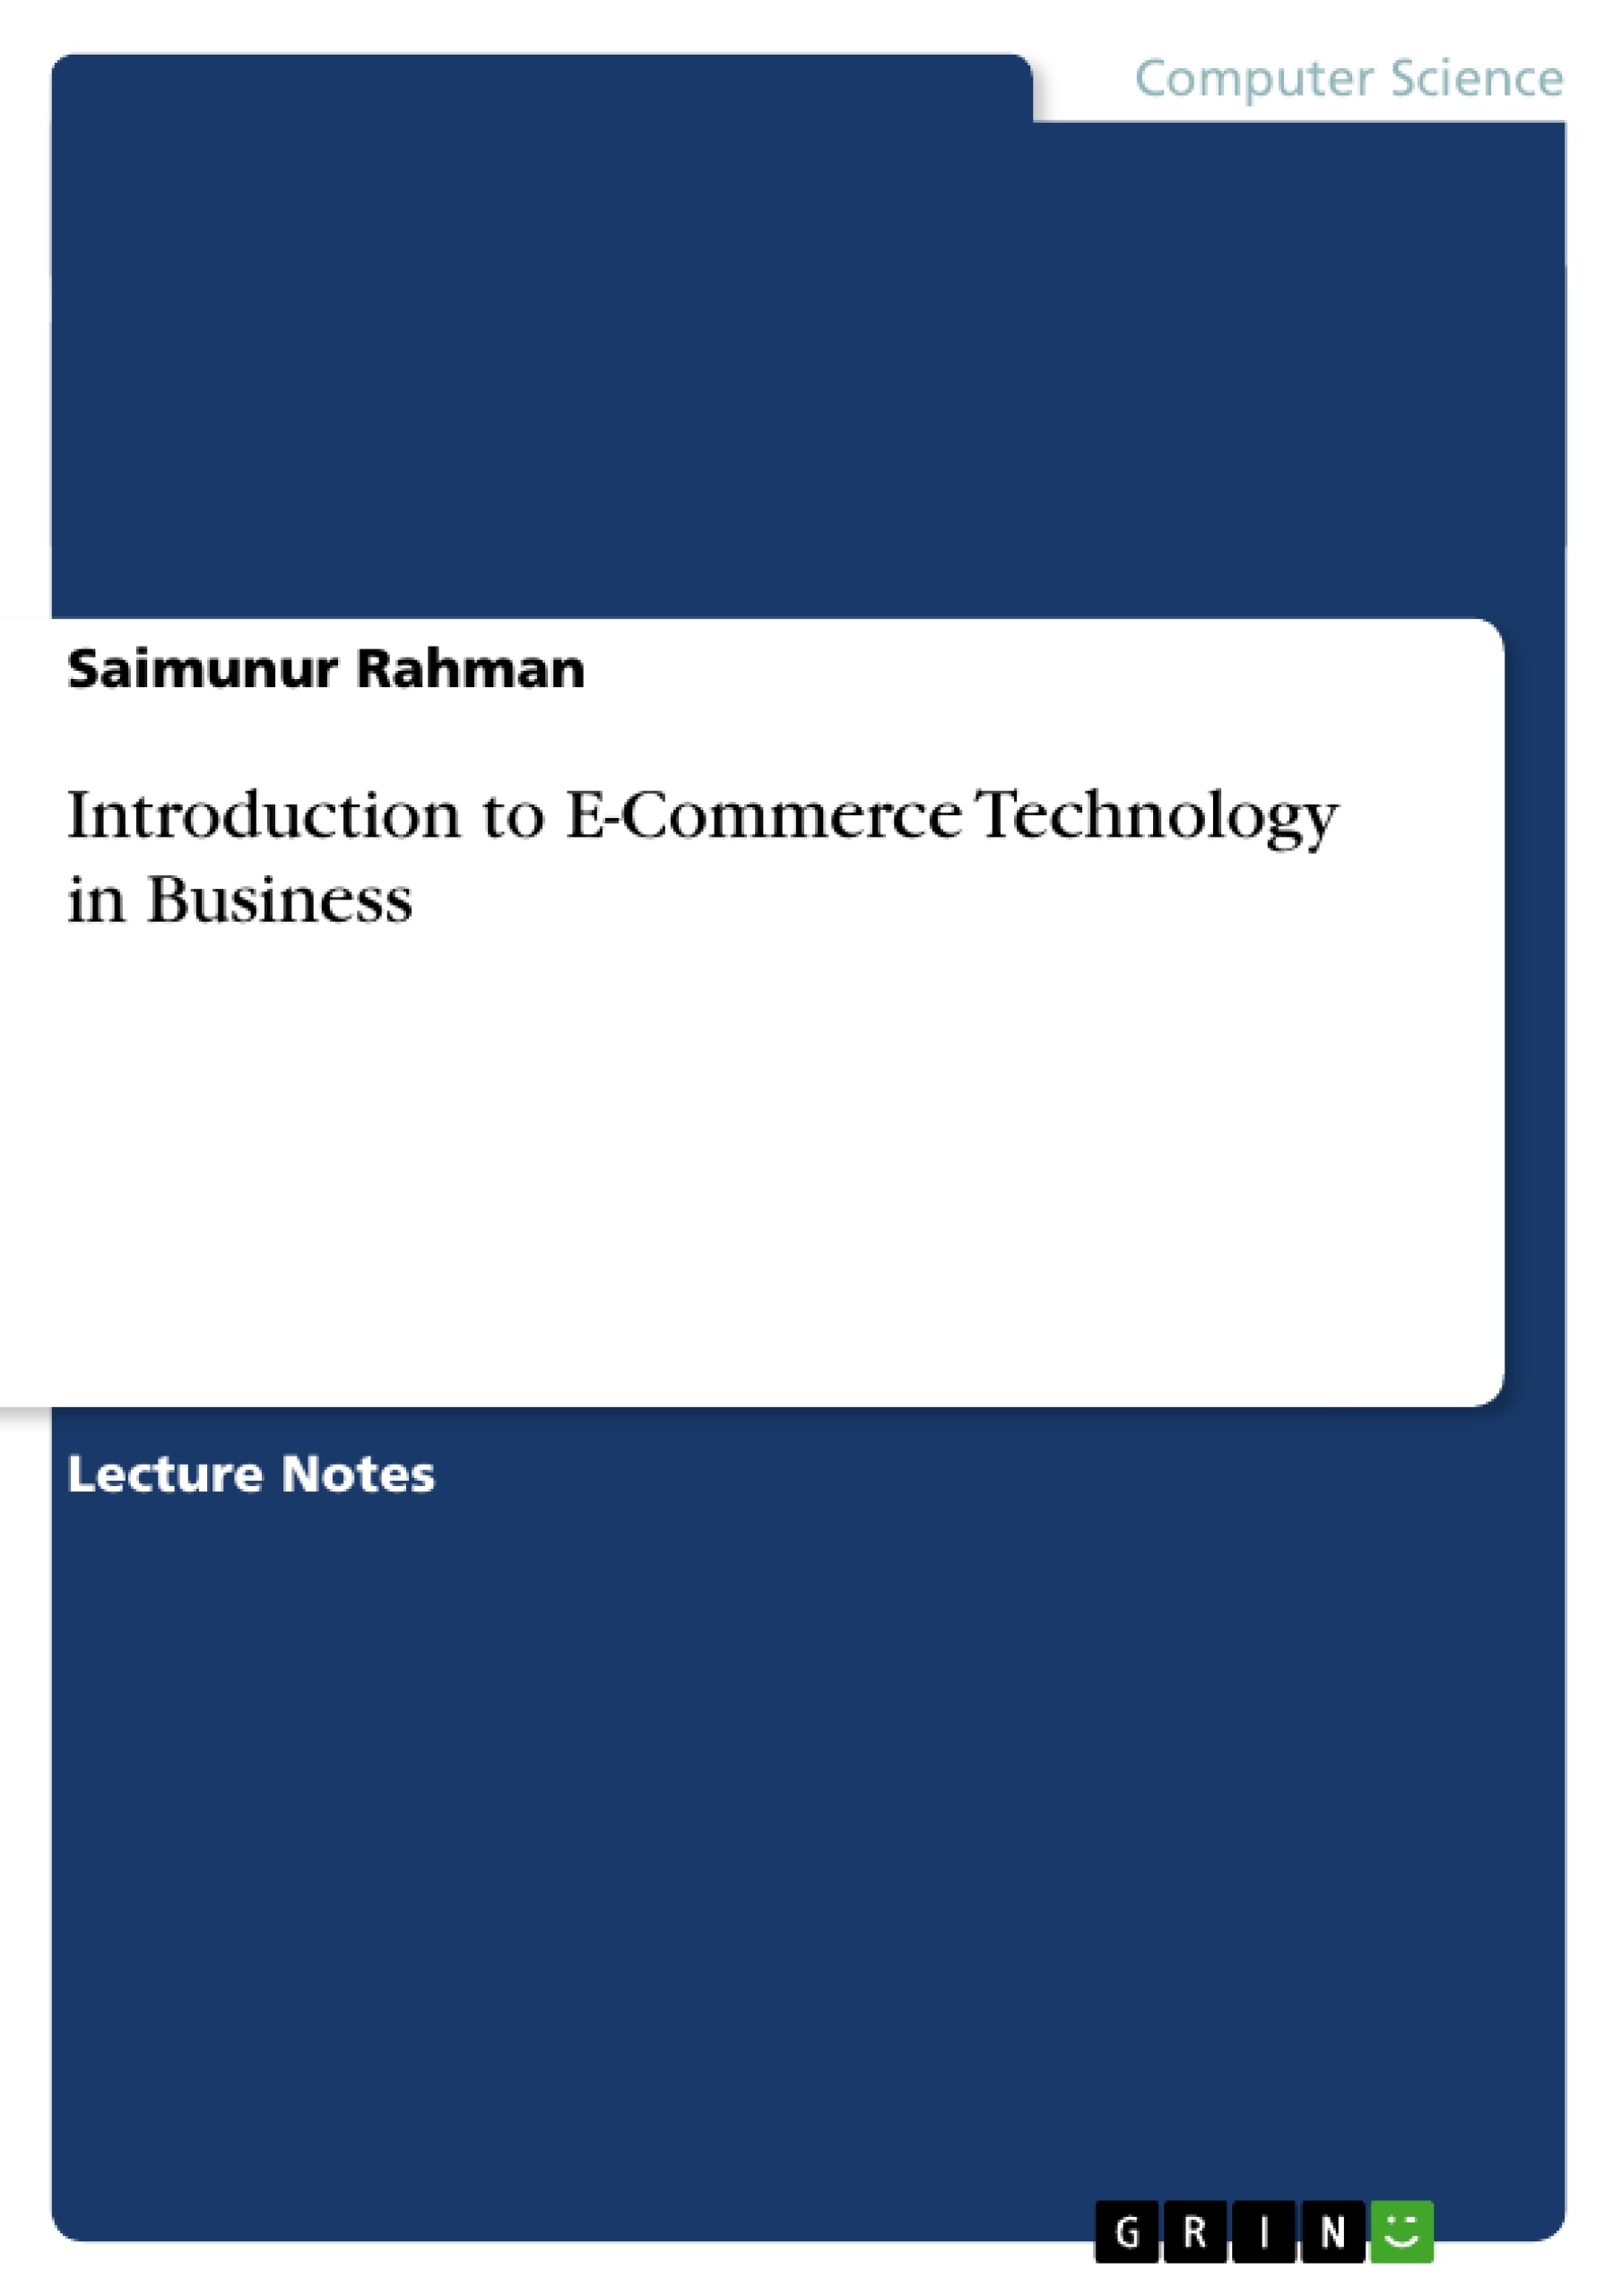 Grin Introduction To E Commerce Technology In Business - 